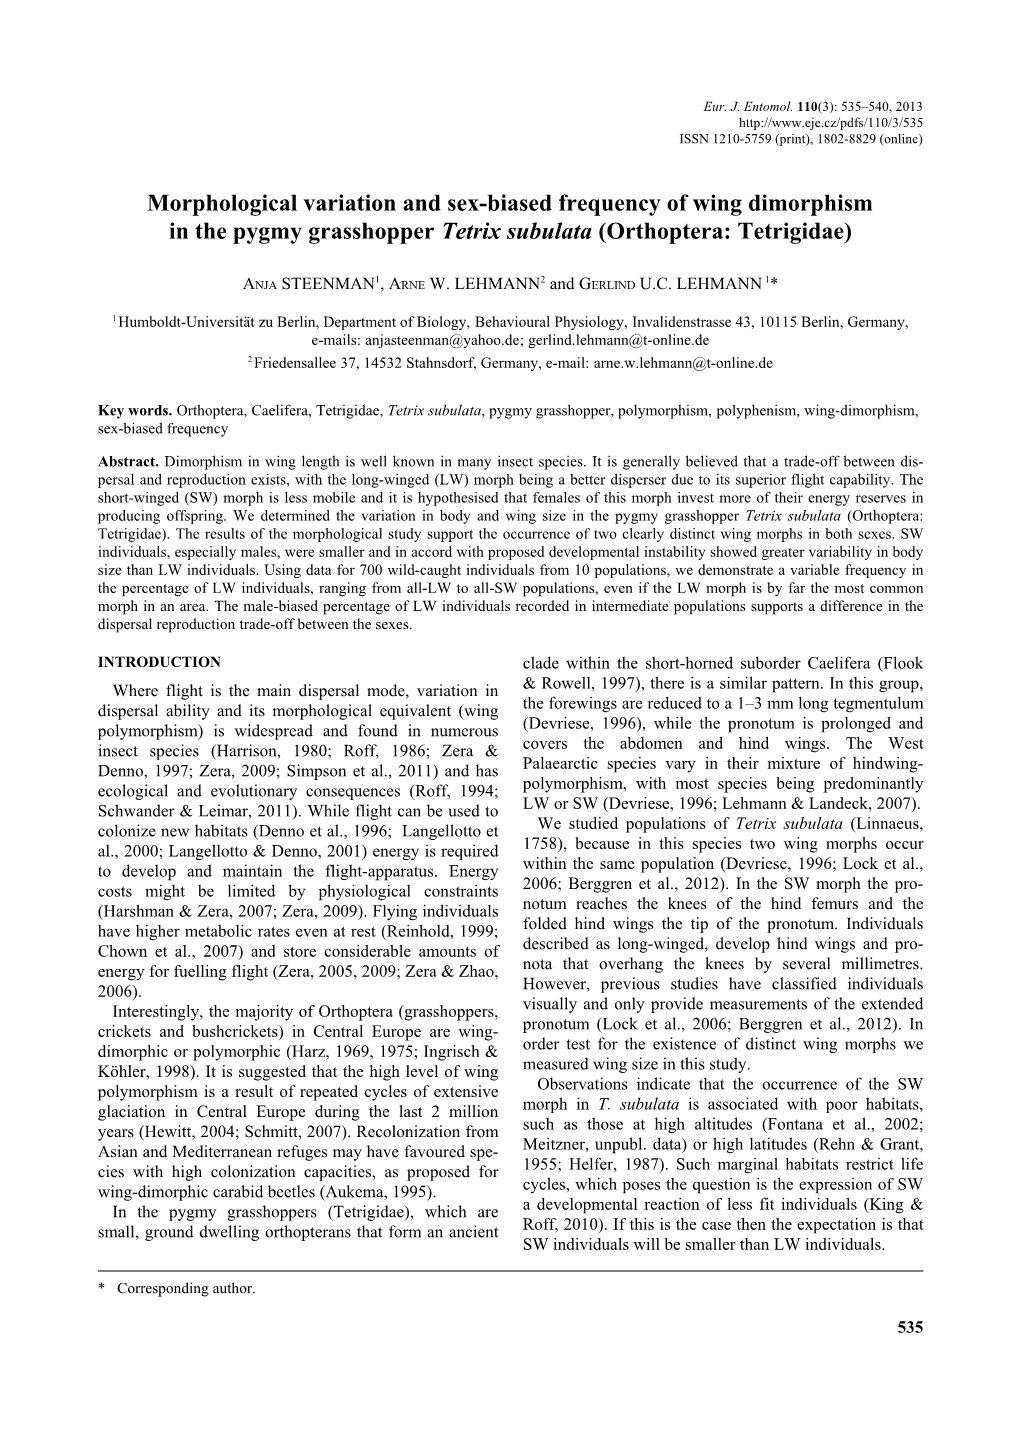 Morphological Variation and Sex-Biased Frequency of Wing Dimorphism in the Pygmy Grasshopper Tetrix Subulata (Orthoptera: Tetrigidae)